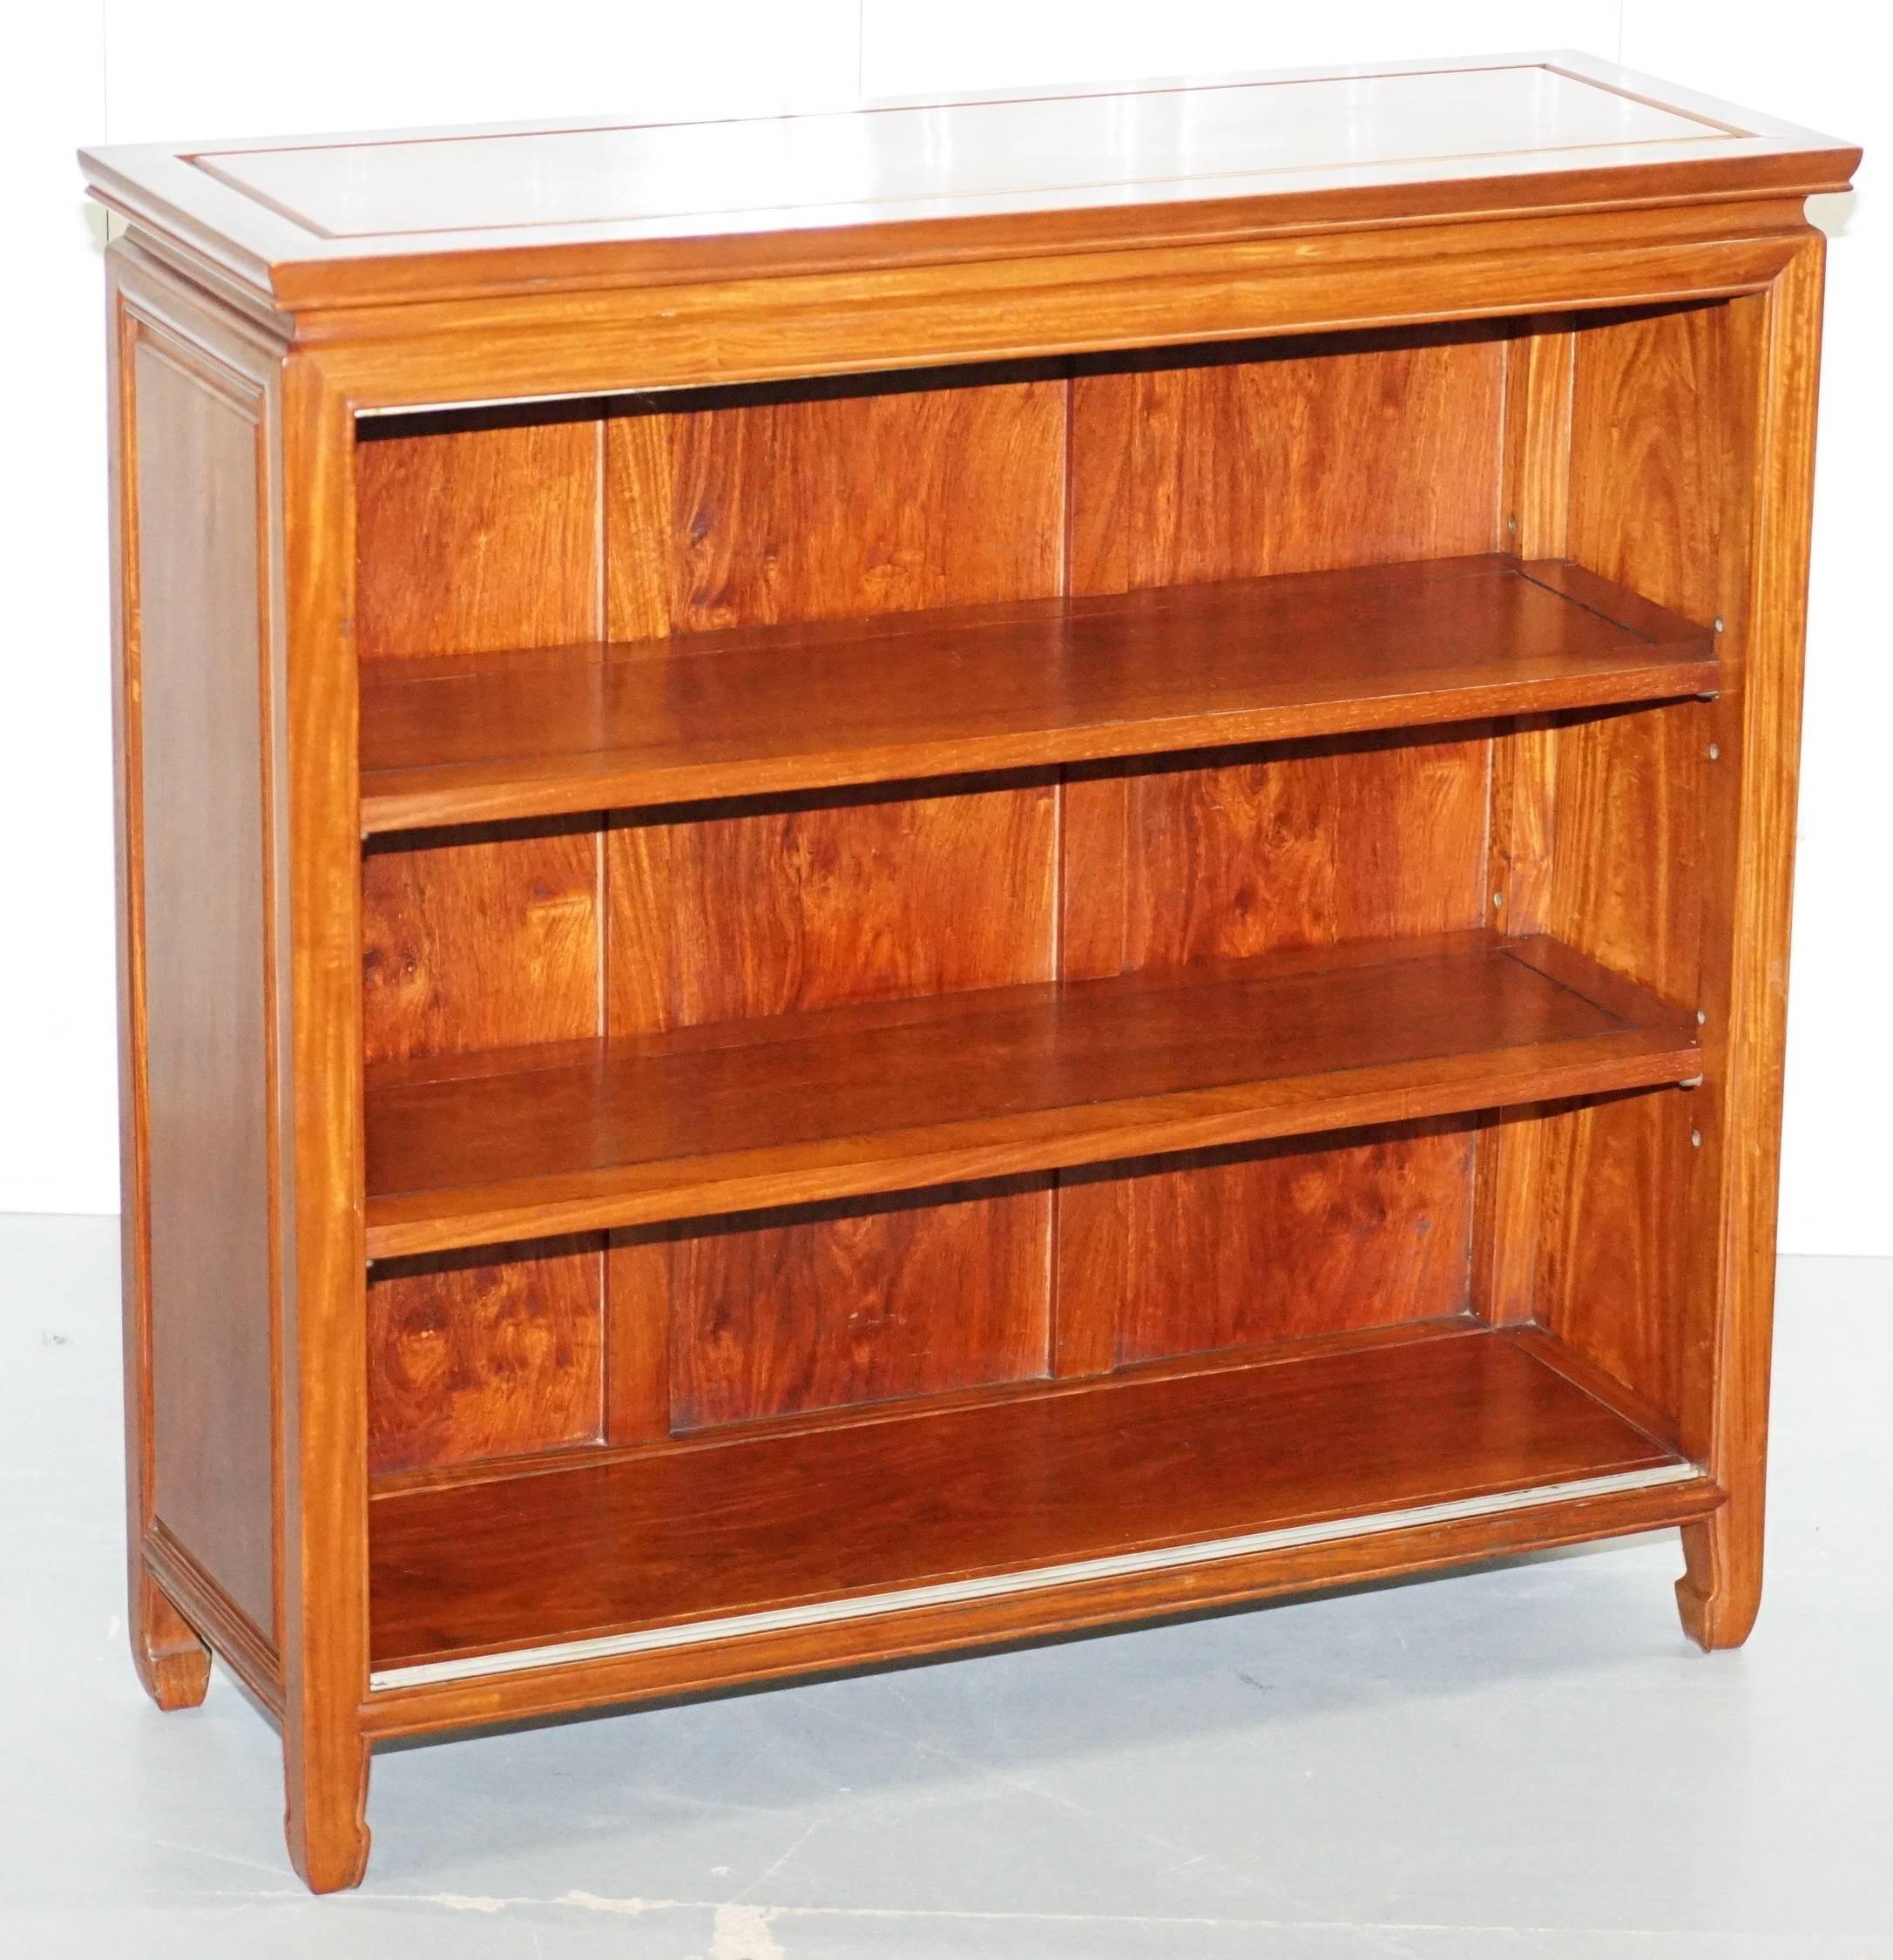 We are delighted to offer for sale this lovely pair of vintage walnut dwarf open bookcases

They are a perfectly matched pair however one takes and has two shelves the other one shelf, otherwise they are identical

They originally had glass